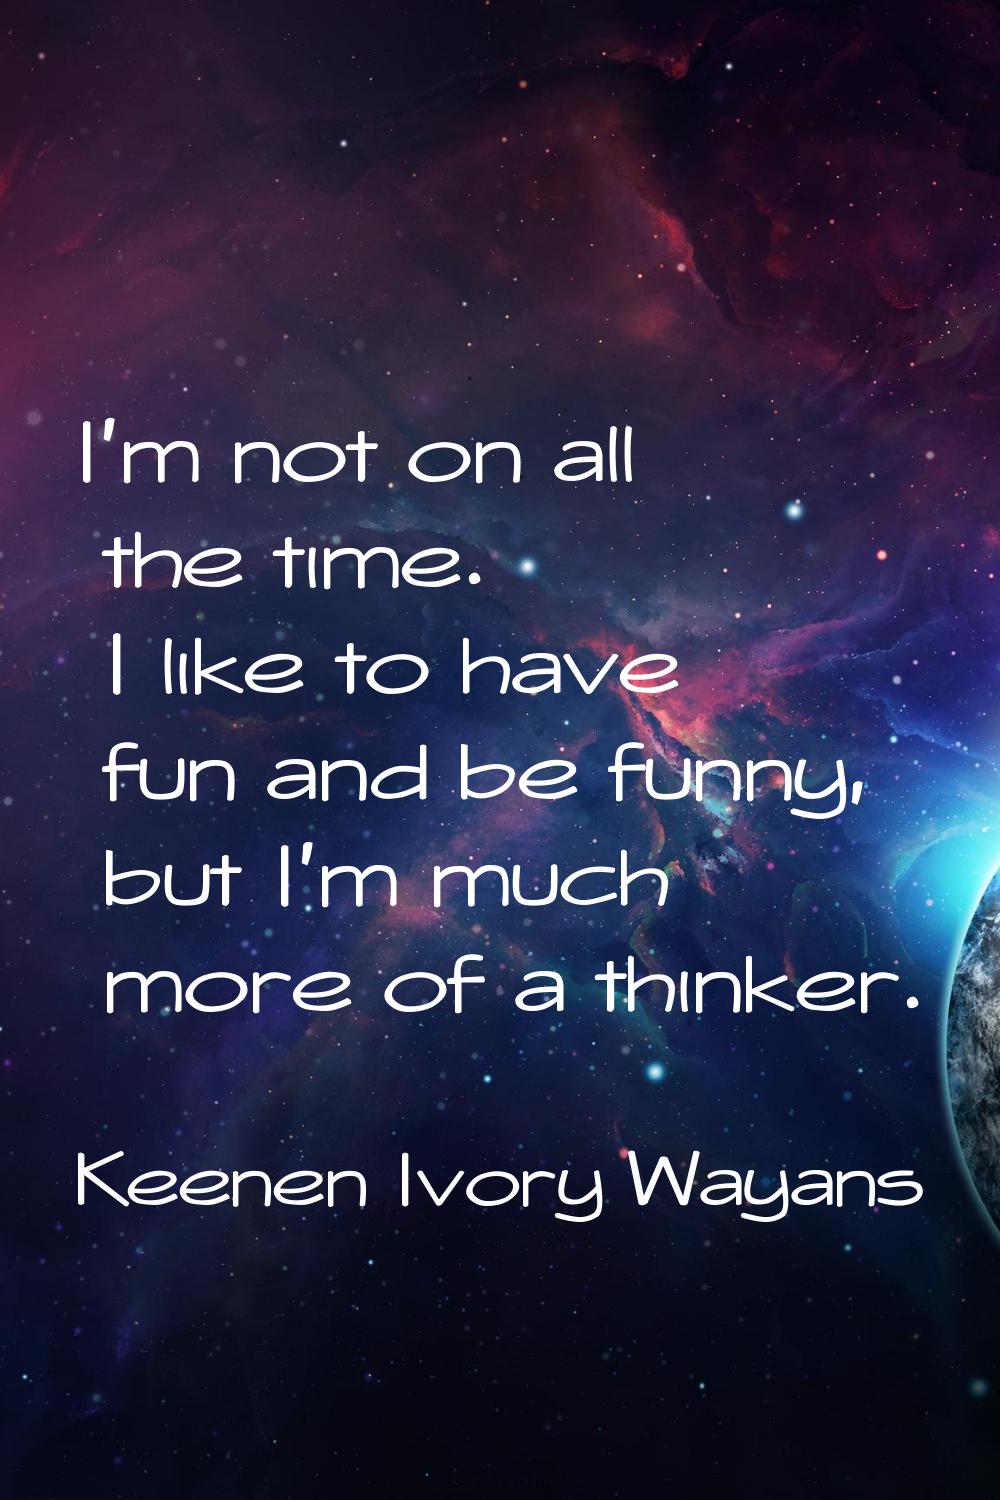 I'm not on all the time. I like to have fun and be funny, but I'm much more of a thinker.